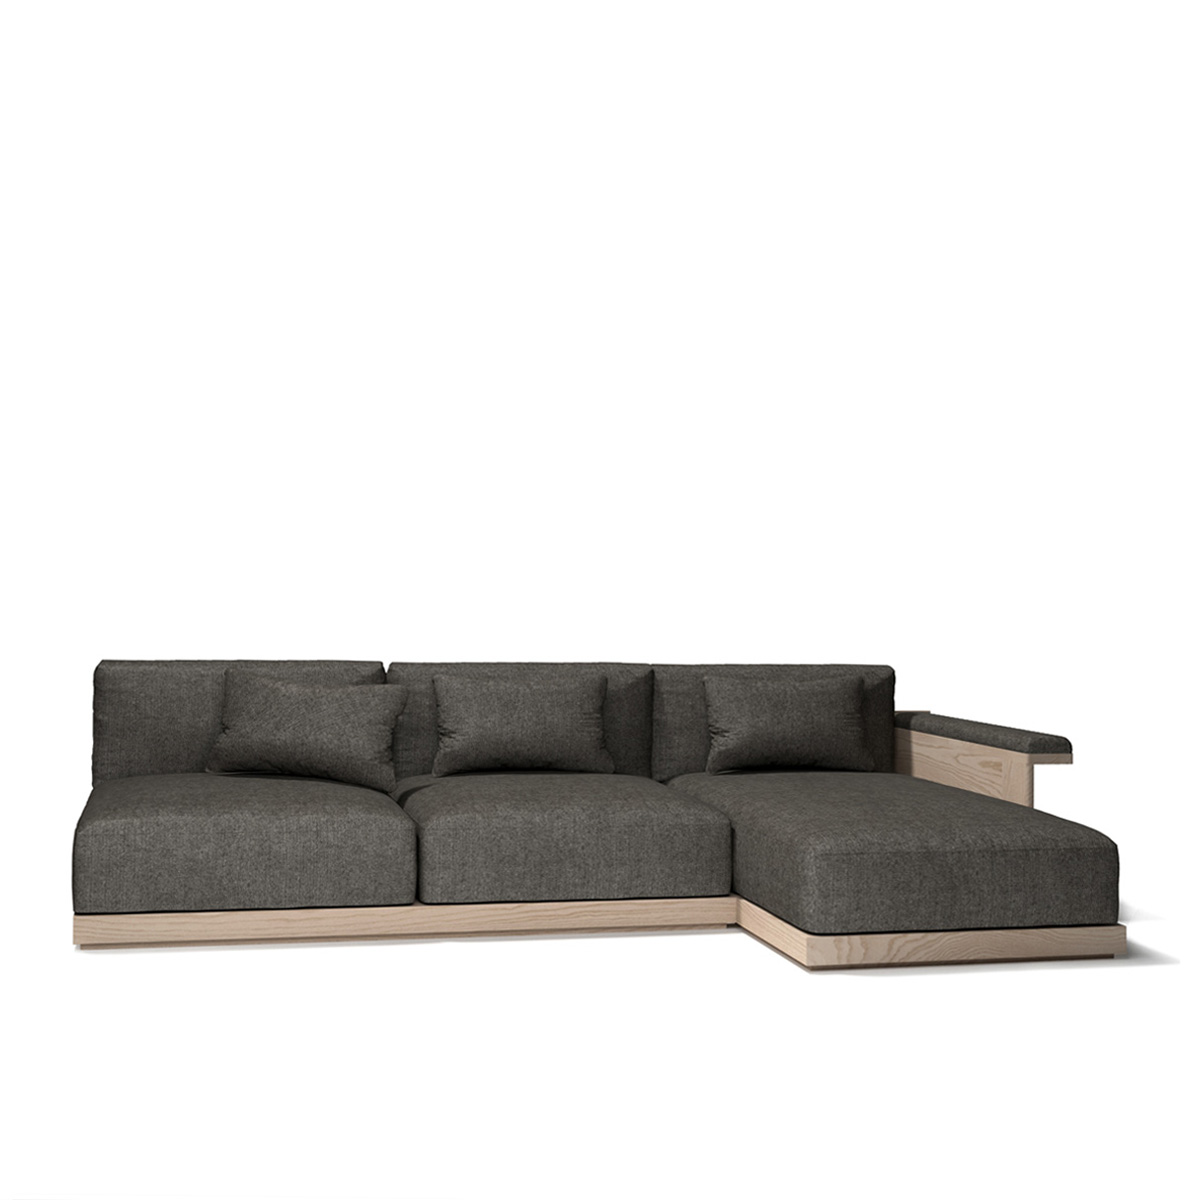 2-seater and right-chaise Jude